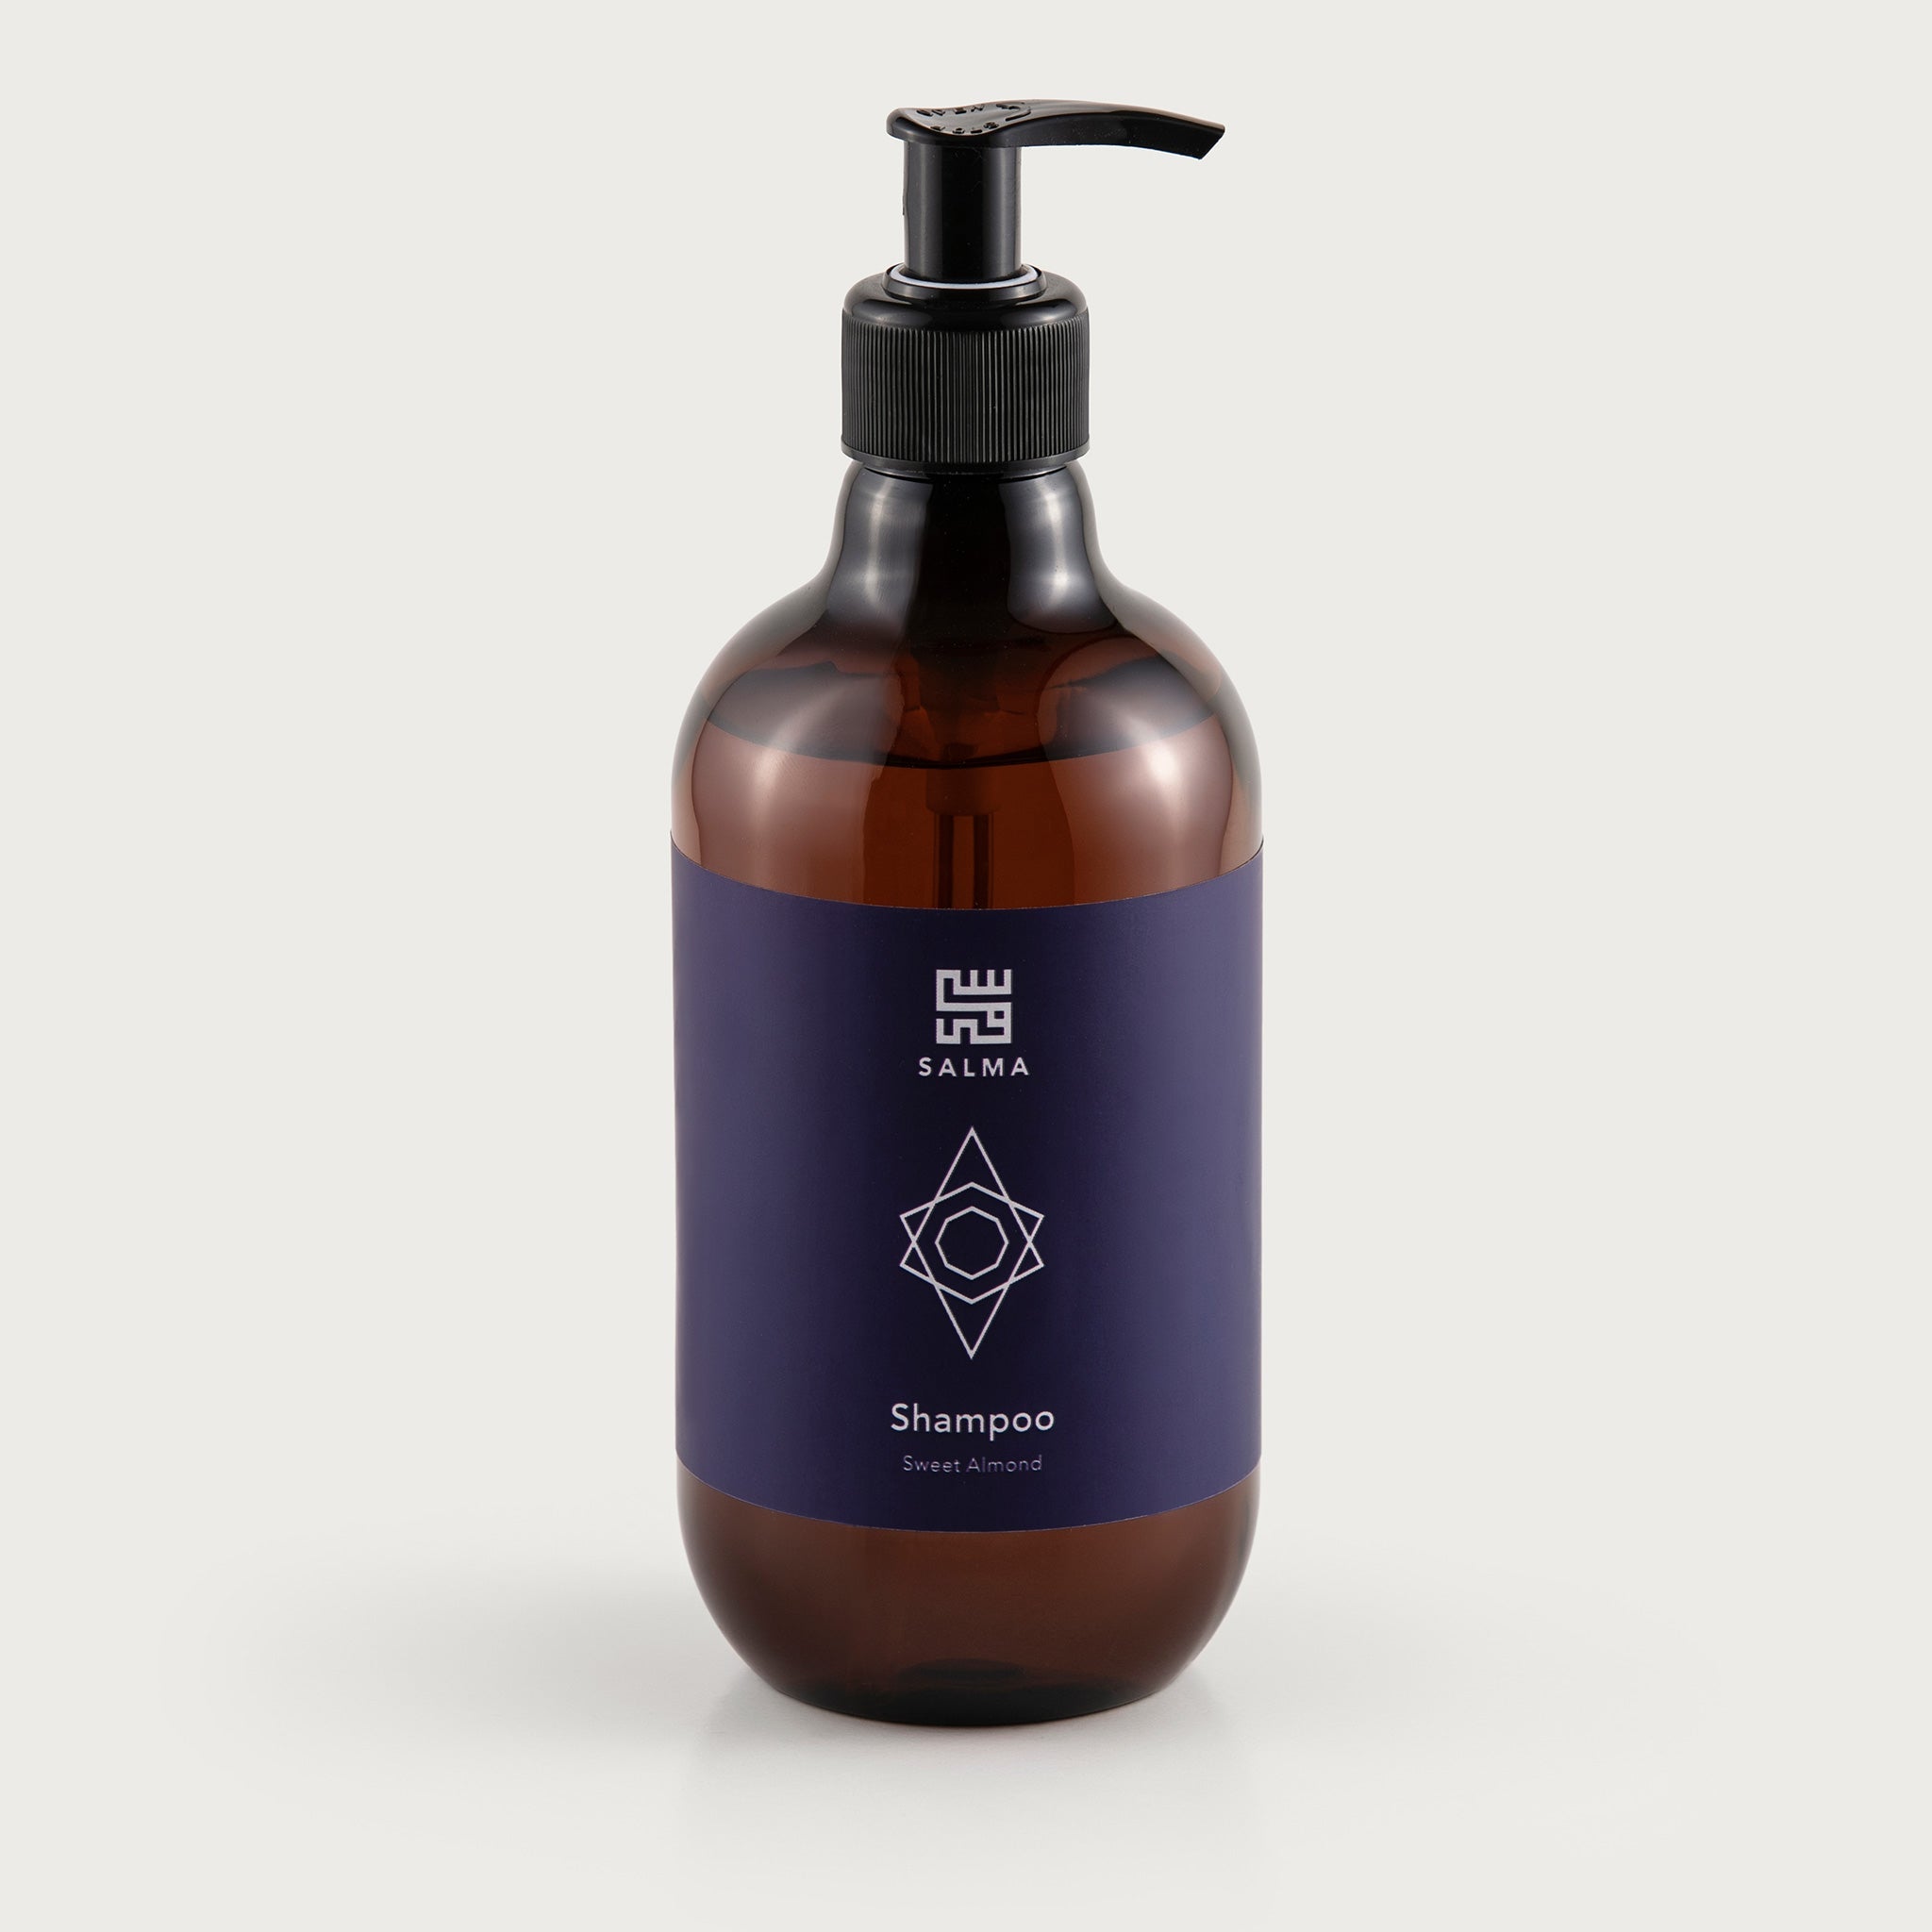 This pump top bottle is amber in color and you can see the liquid soap inside. The label is simple and clean, deep purple in color with the Salma logo and sweet almond scent notated.